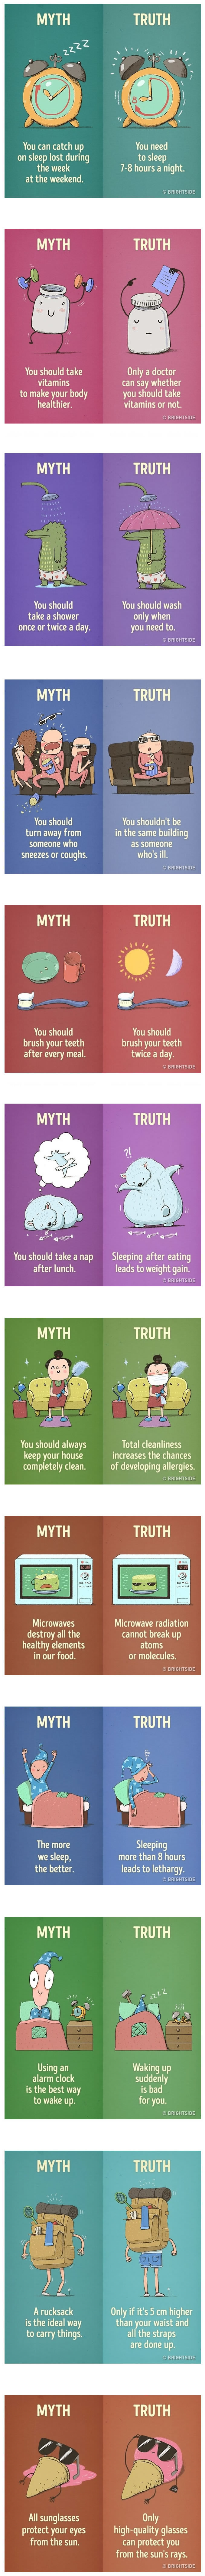 various myths and truths in life, infographic